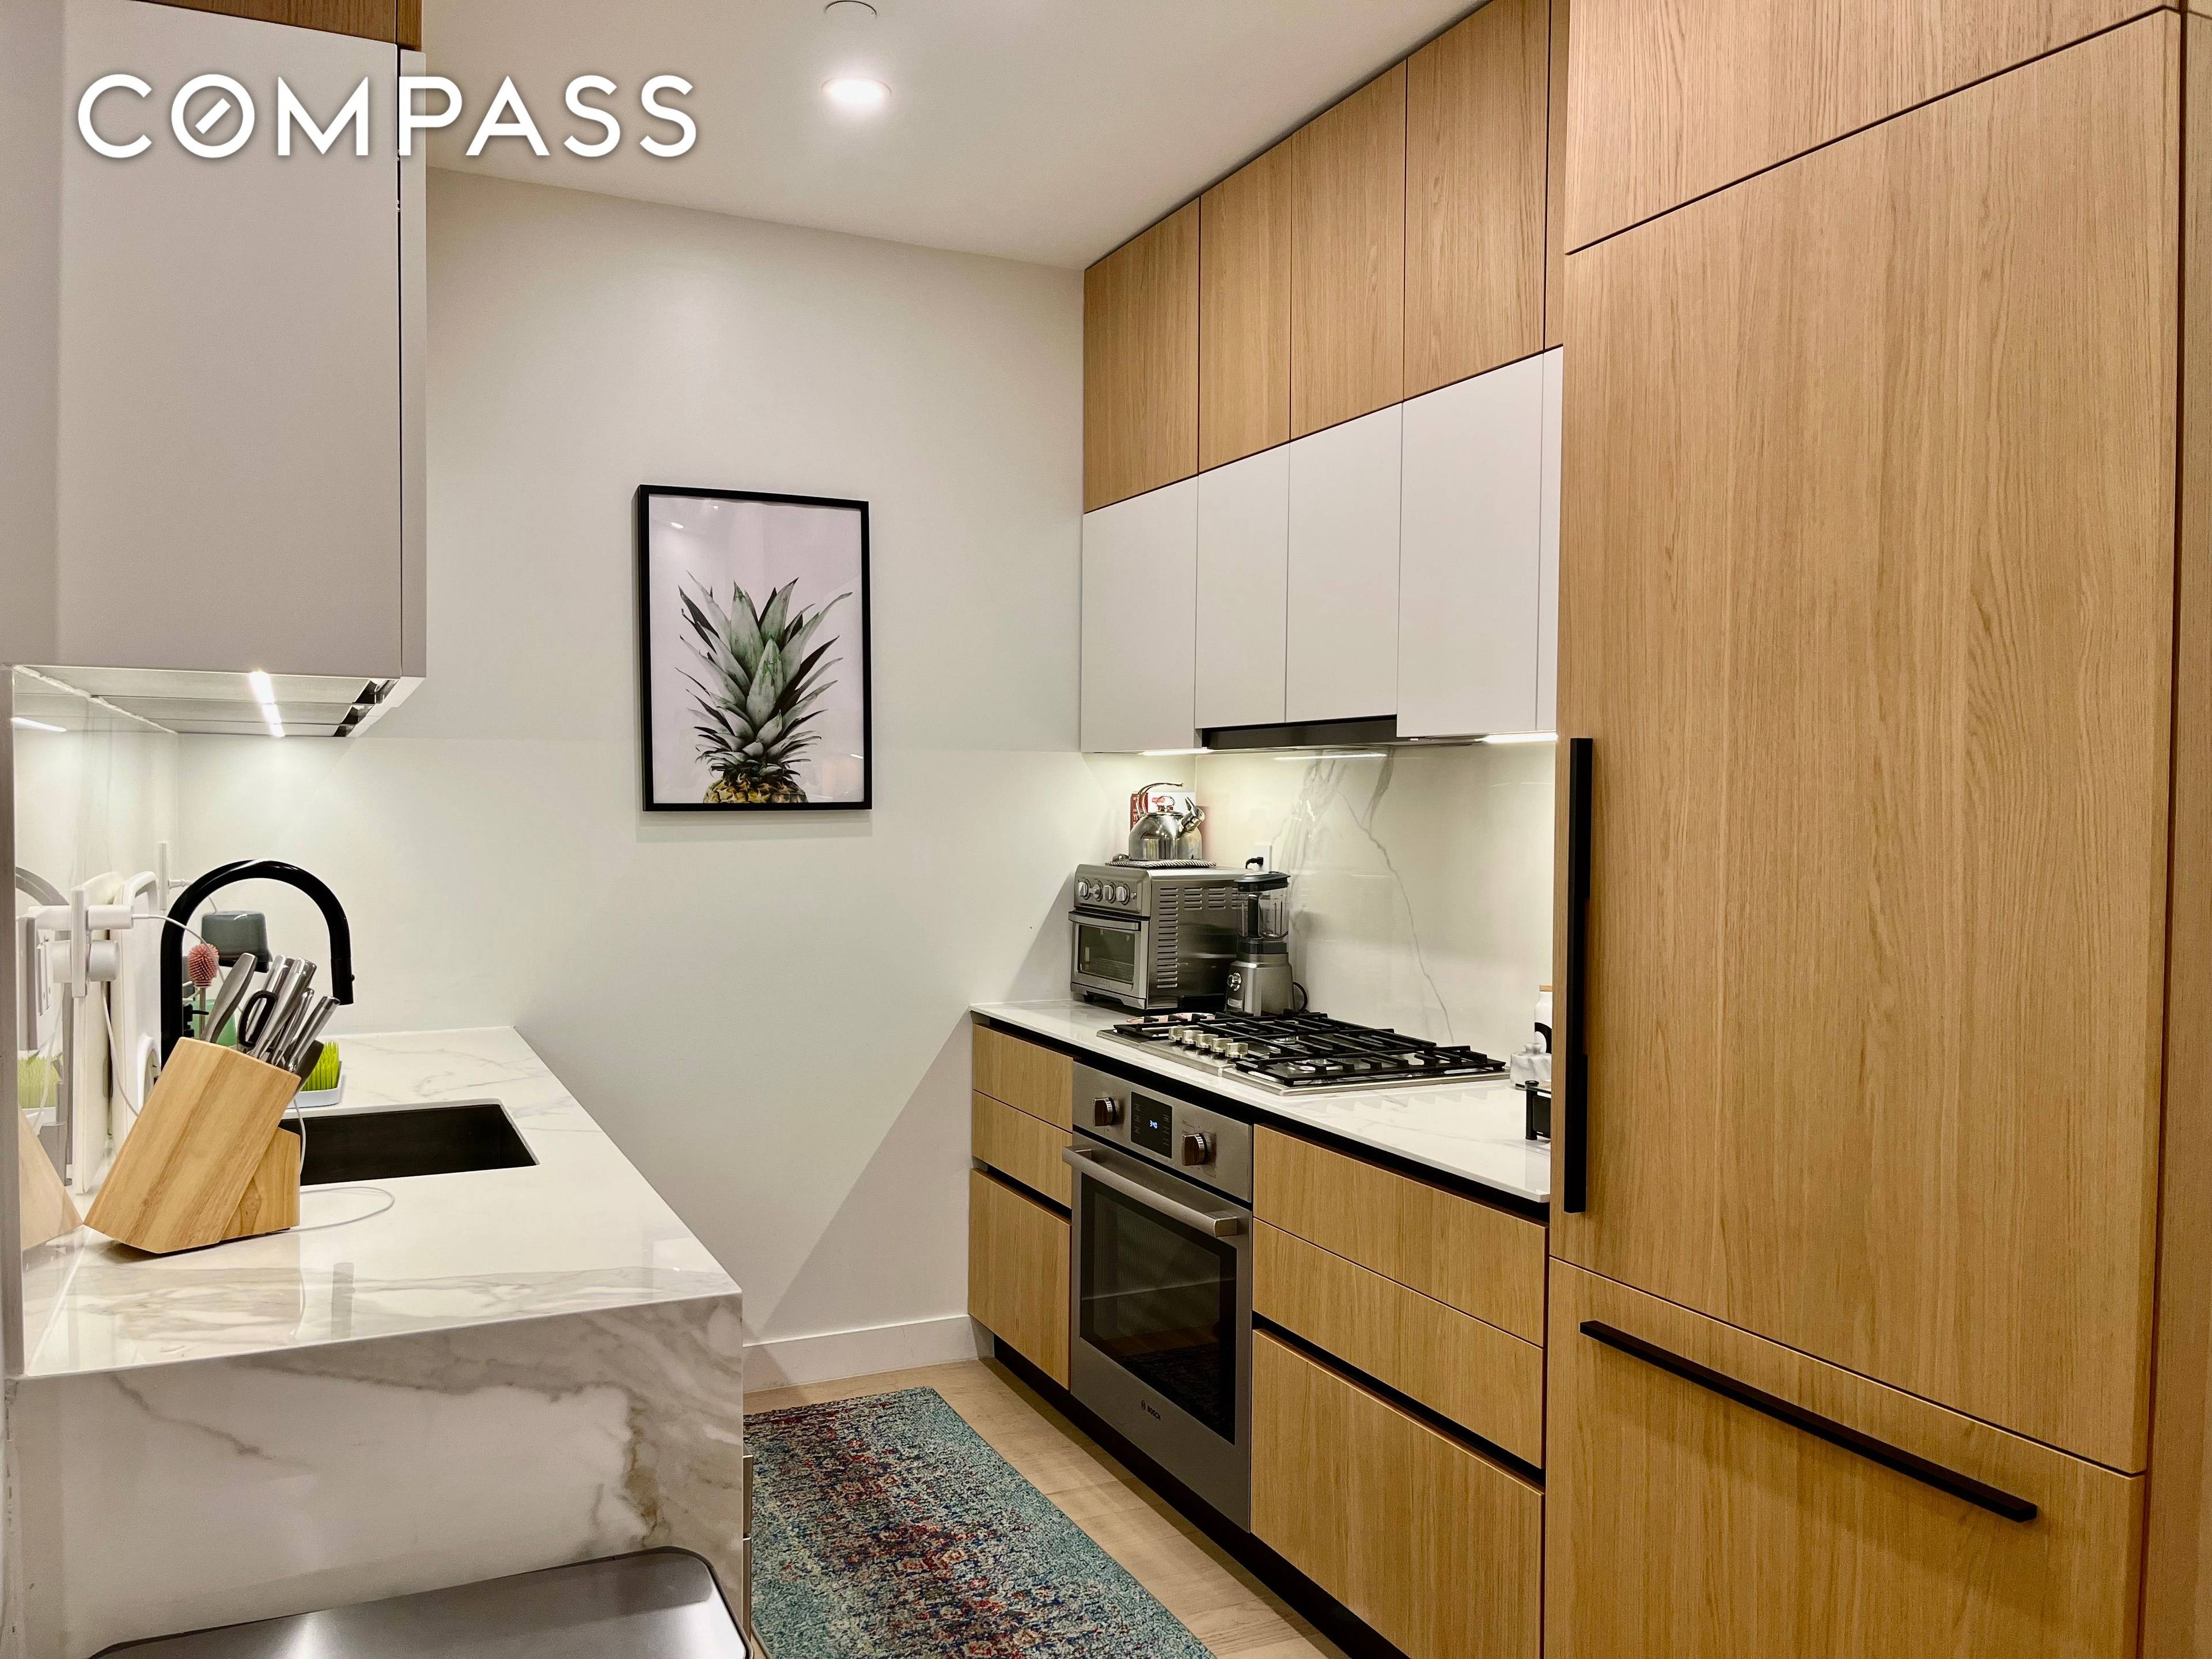 Located in one of the premier condo buildings in Long Island City, this 2 BR 2 BA unit is all about smart functionality and high end finishes.